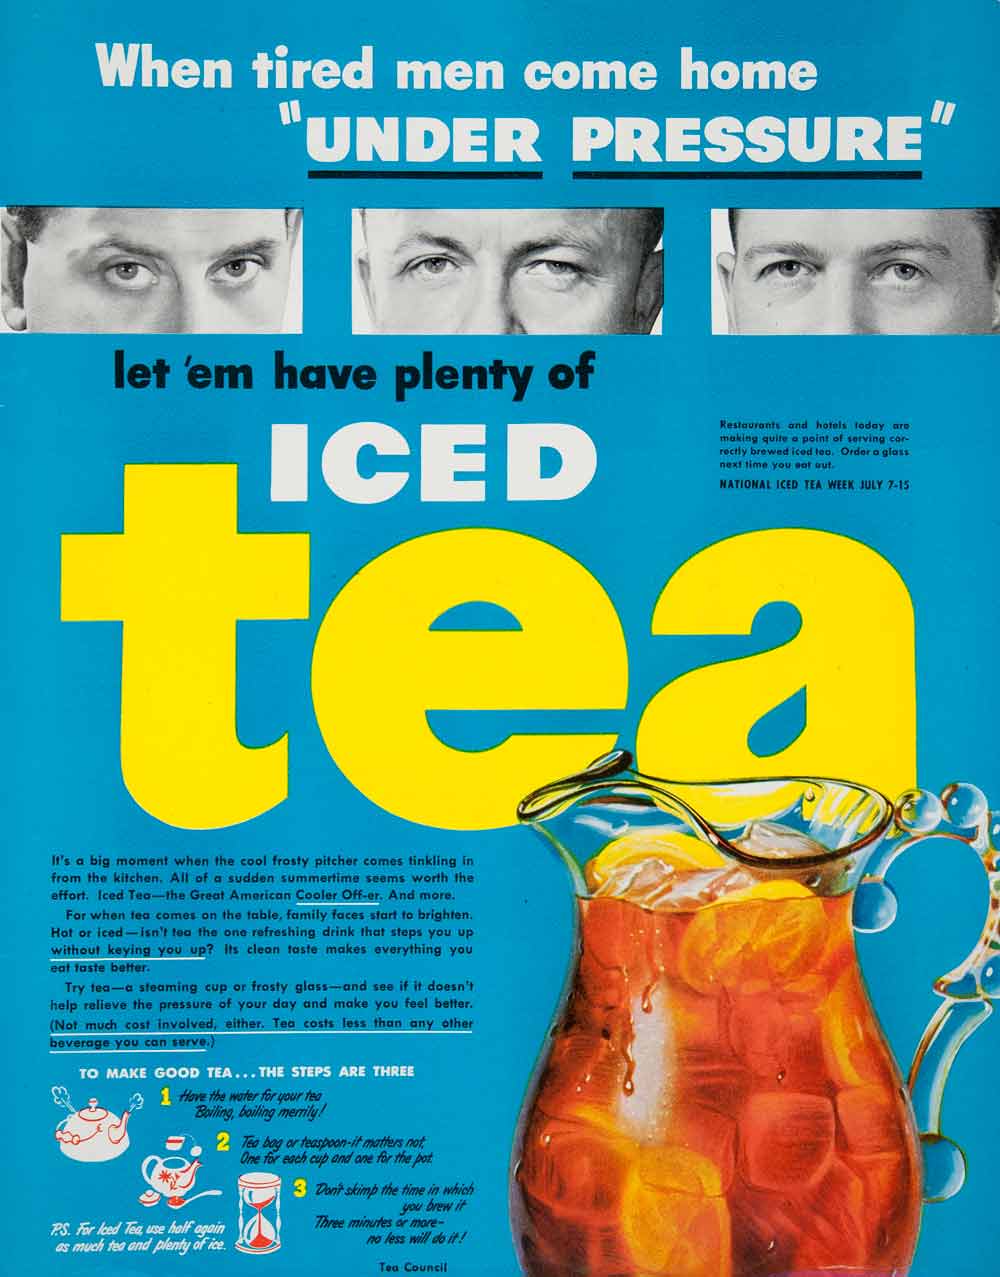 How to Use our WK Iced Tea Maker 